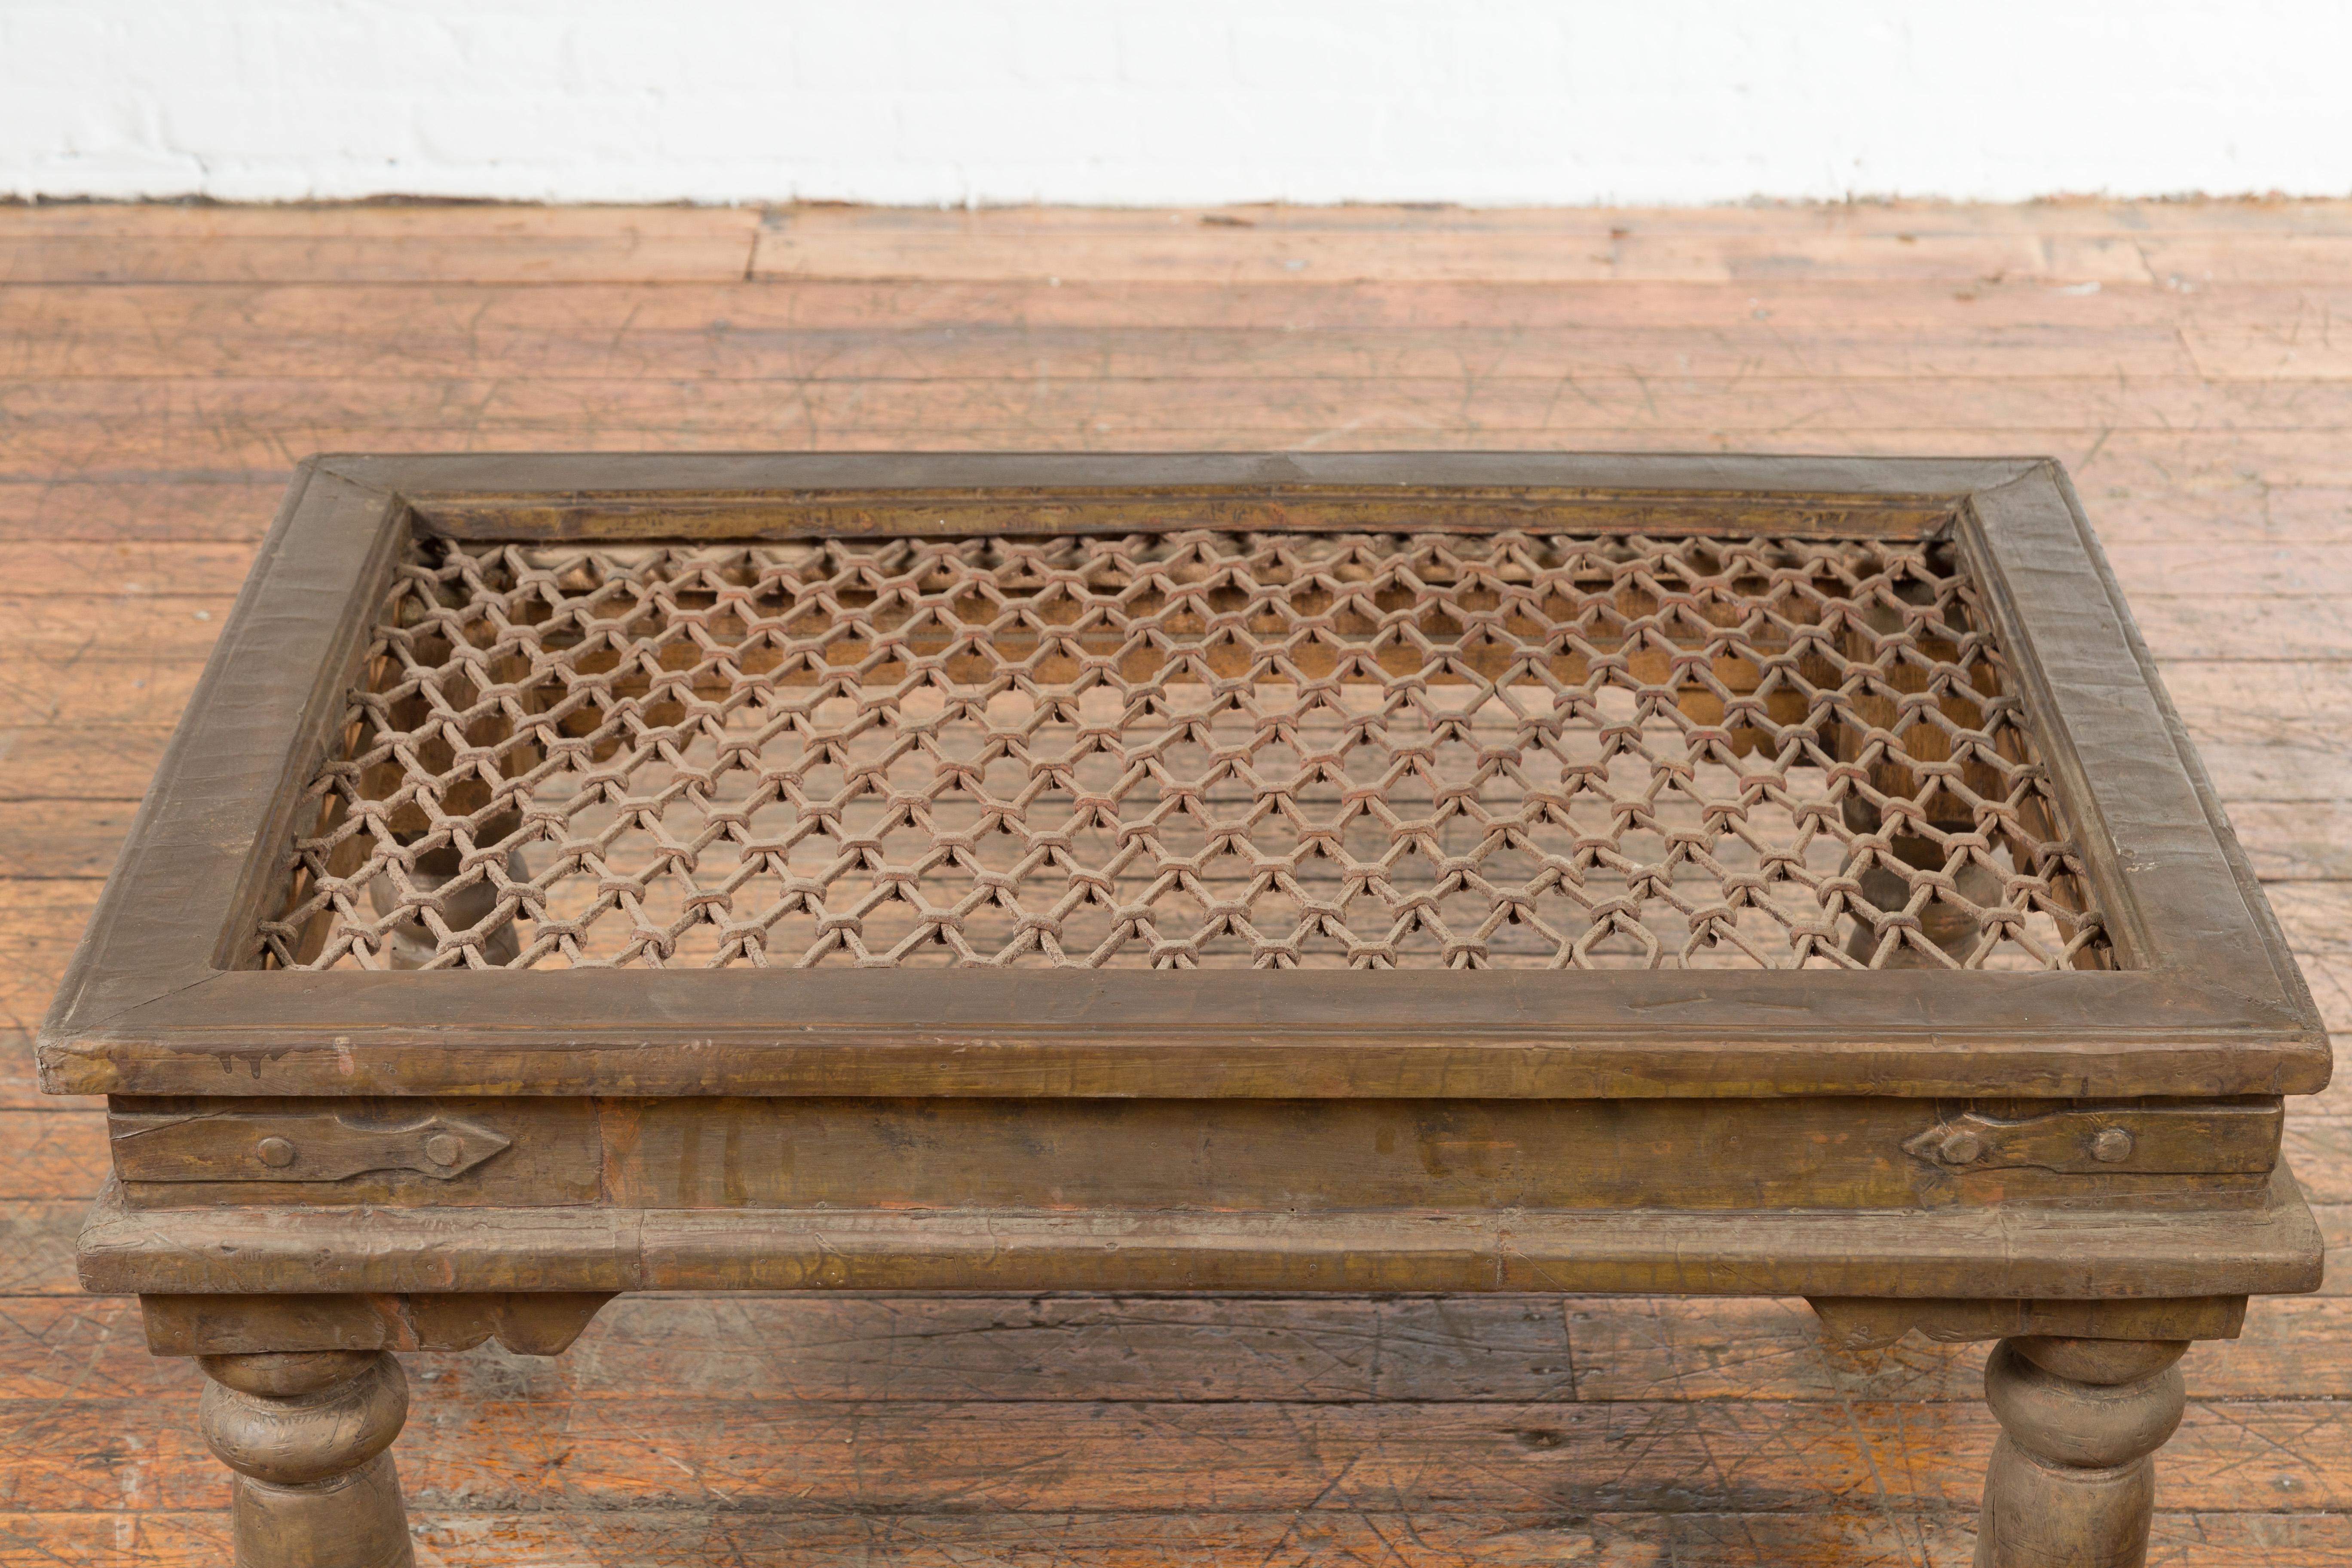 20th Century Antique Indian Metal Window Grill Made into Coffee Table with Baluster Legs For Sale